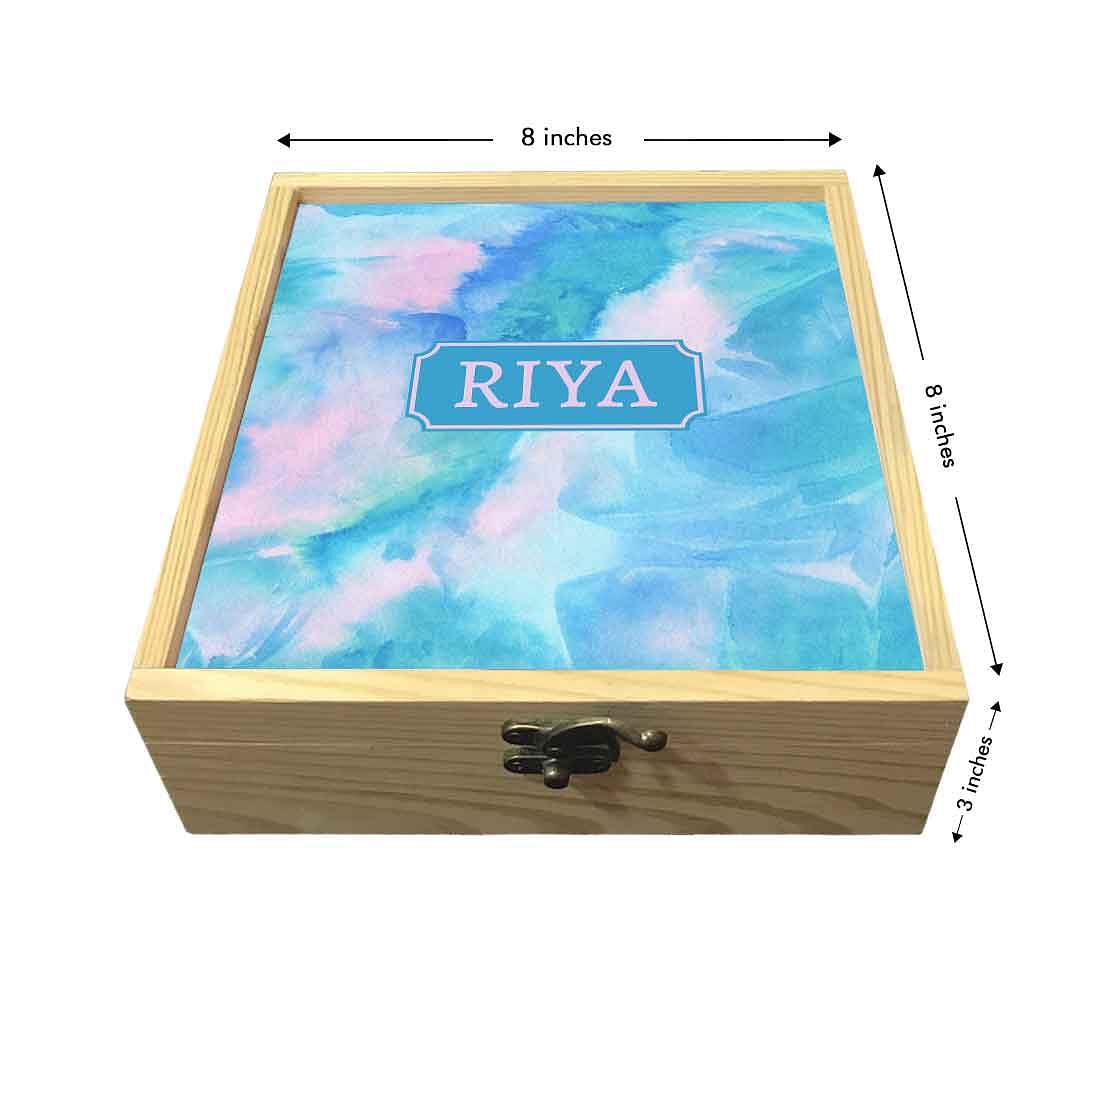 New Traditional Jewellery Box Organizer - Arctic Space Sky Blue and Green Watercolor Nutcase